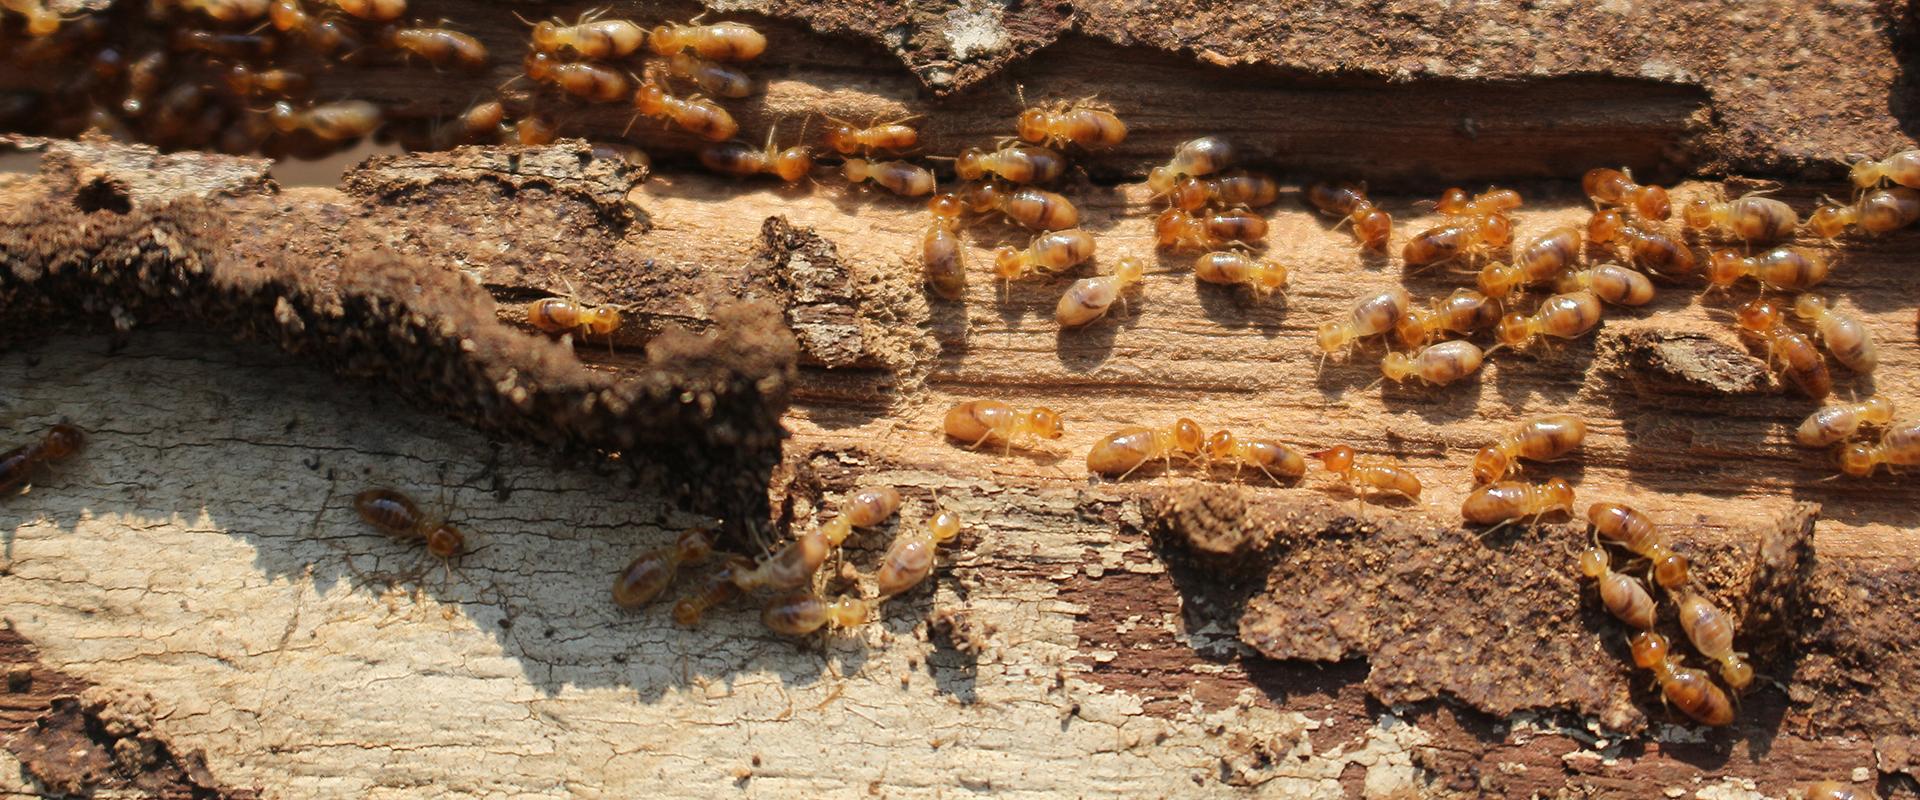 termites on a wooden log